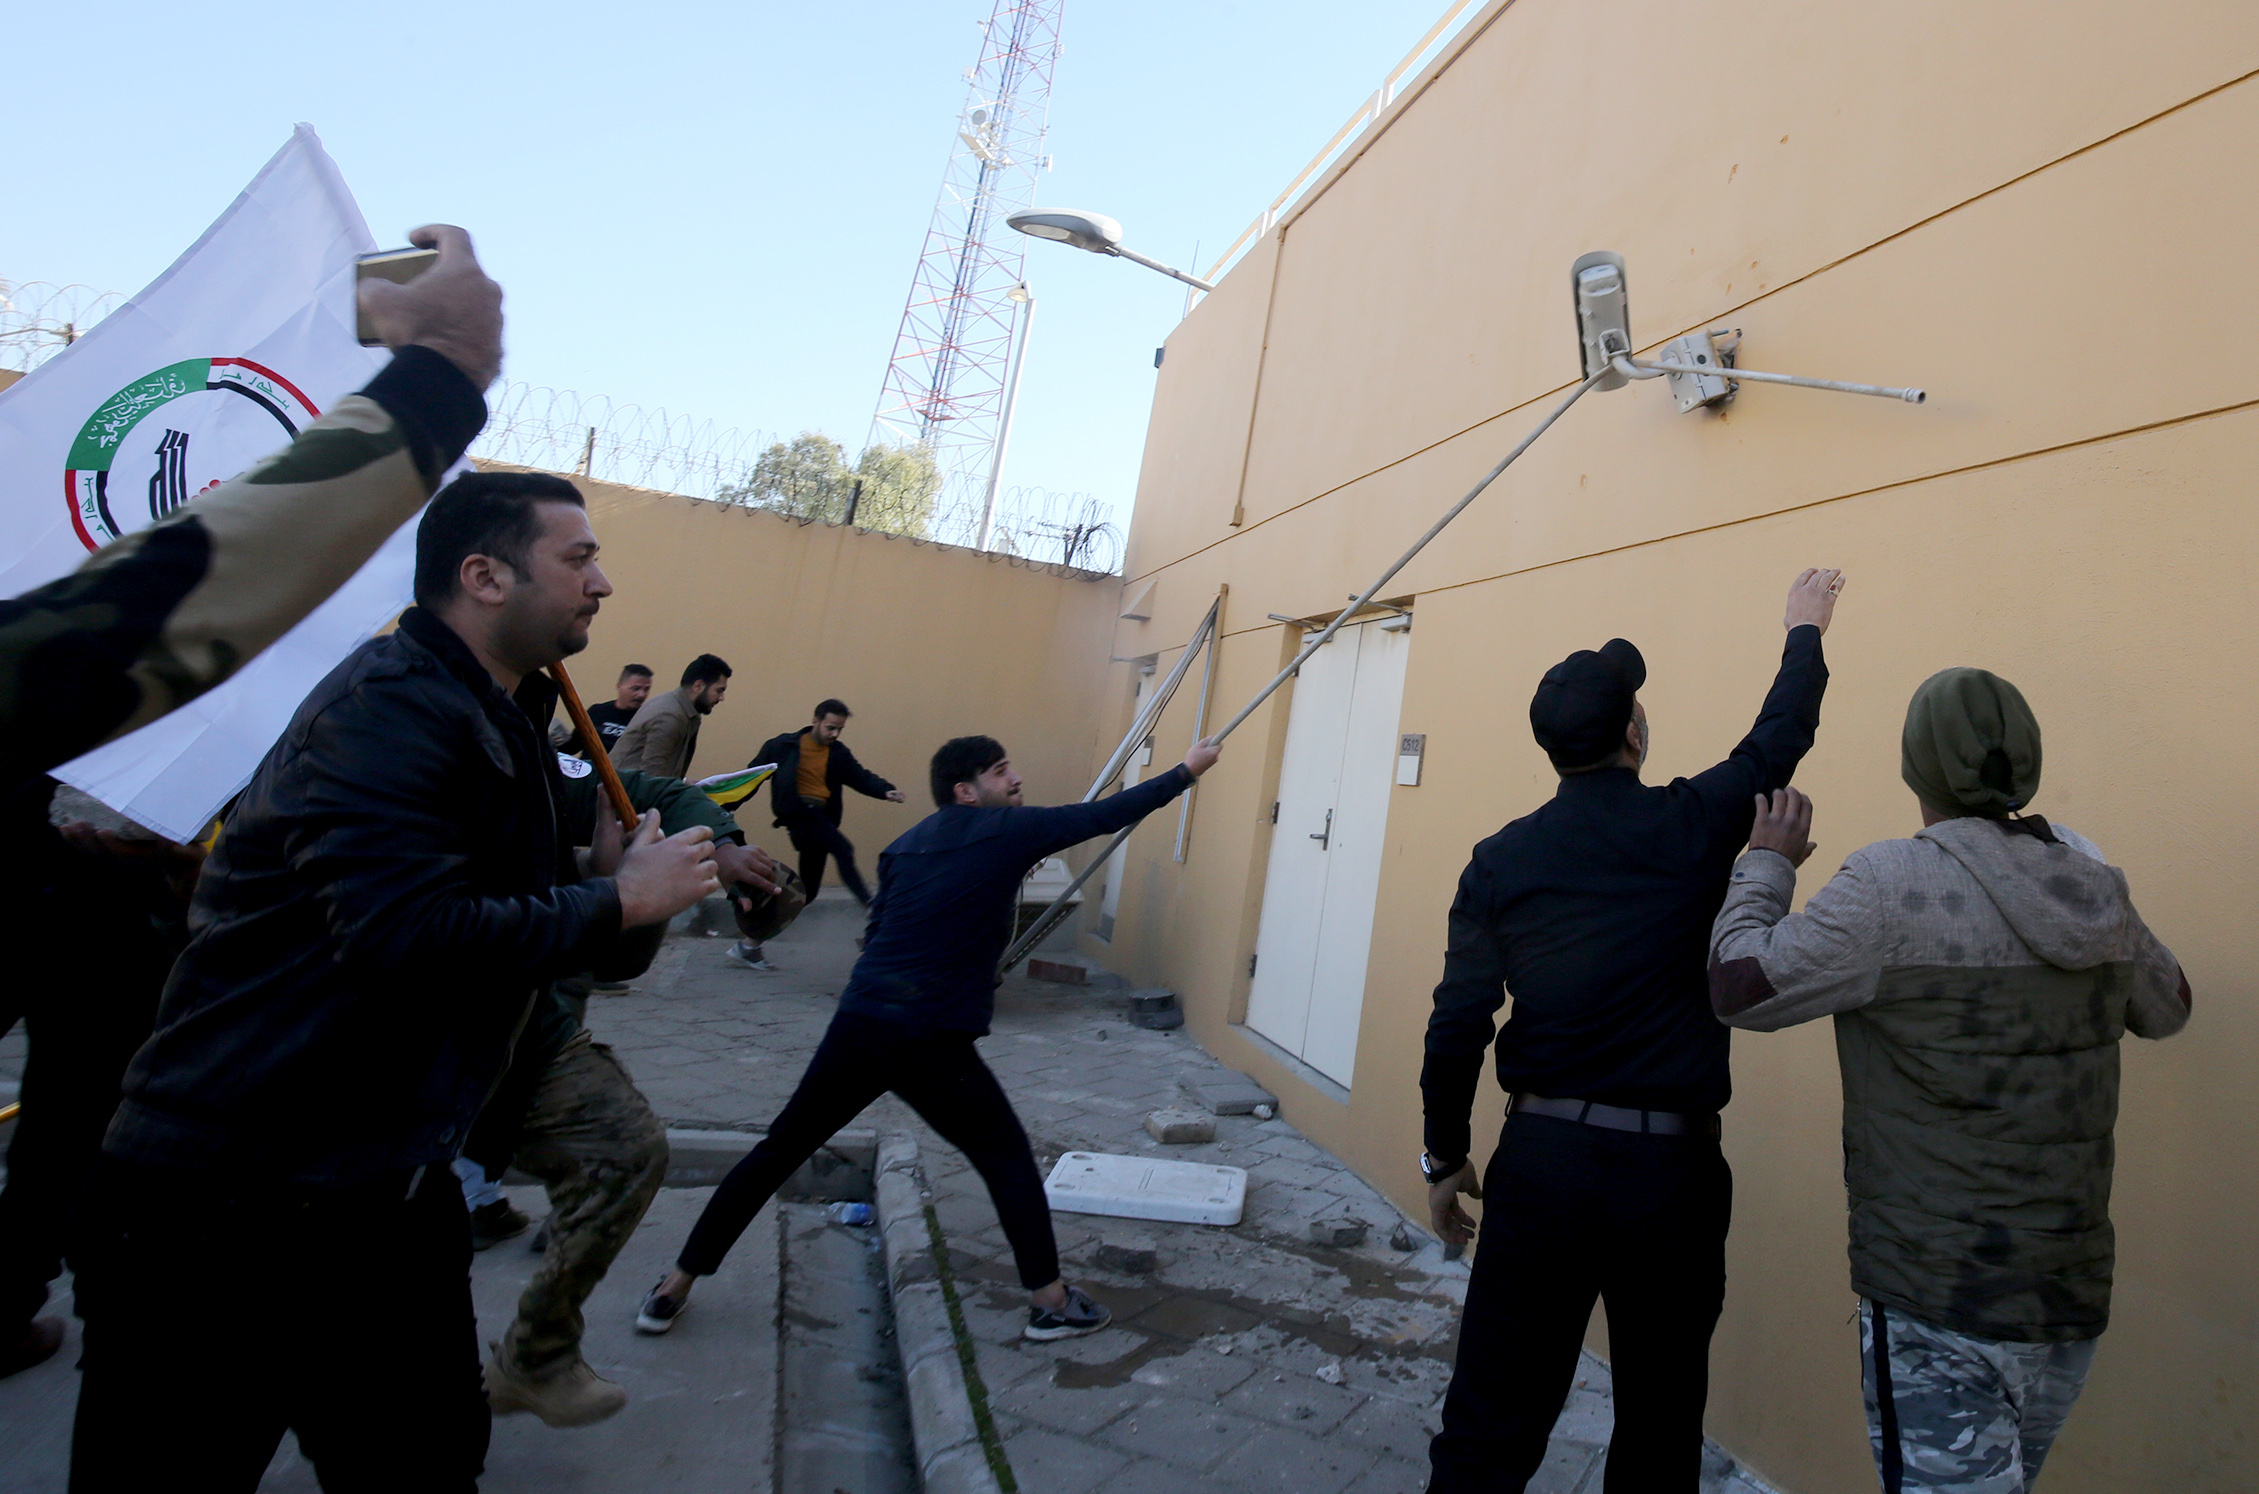 Iraqi protesters breach the outer wall of the US embassy in Baghdad during an angry demonstration on December 31, 2019 to denounce weekend US air strikes that killed Iran-backed fighters in Iraq. (AHMAD AL-RUBAYE/AFP via Getty Images)